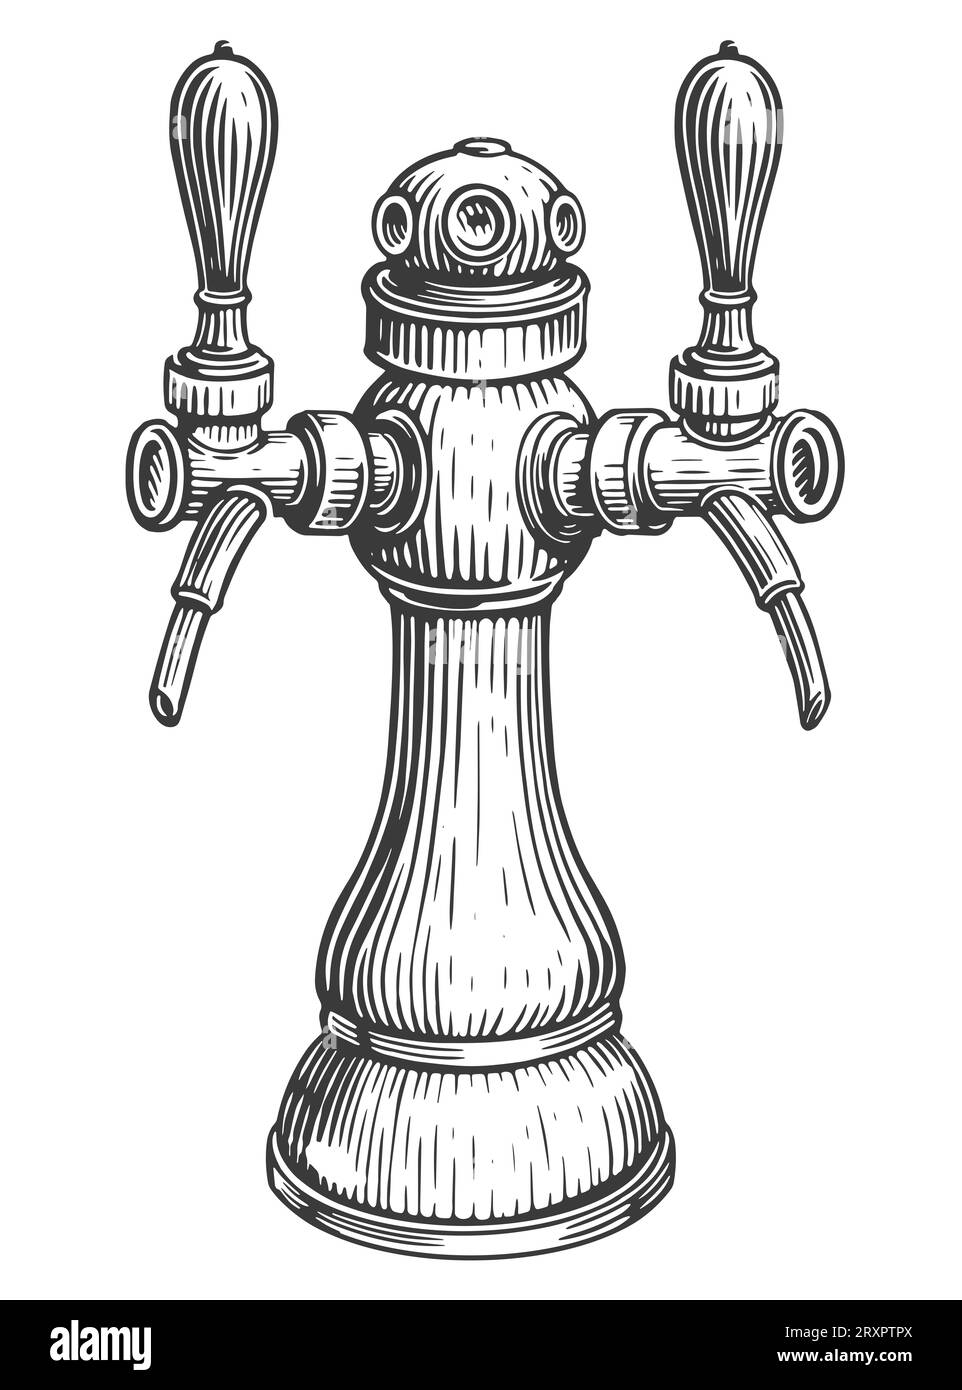 Vintage beer tap in engraving style. Illustration of bar or pub equipment for releasing alcoholic beverages Stock Photo